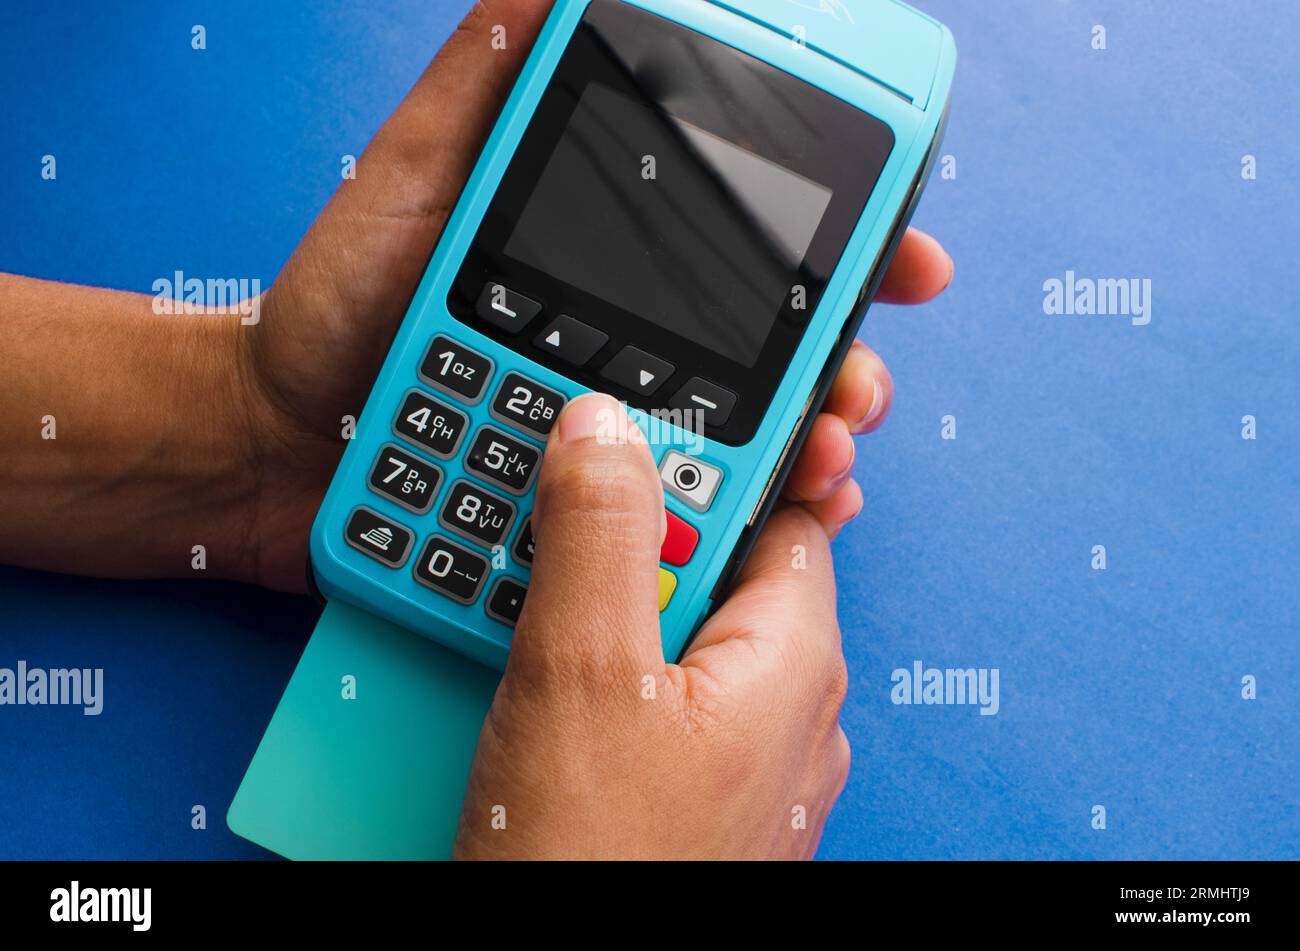 Closeup of hands holding a modern credit card payment device, Contactless technology facilitating fast and secure transactions. Stock Photo